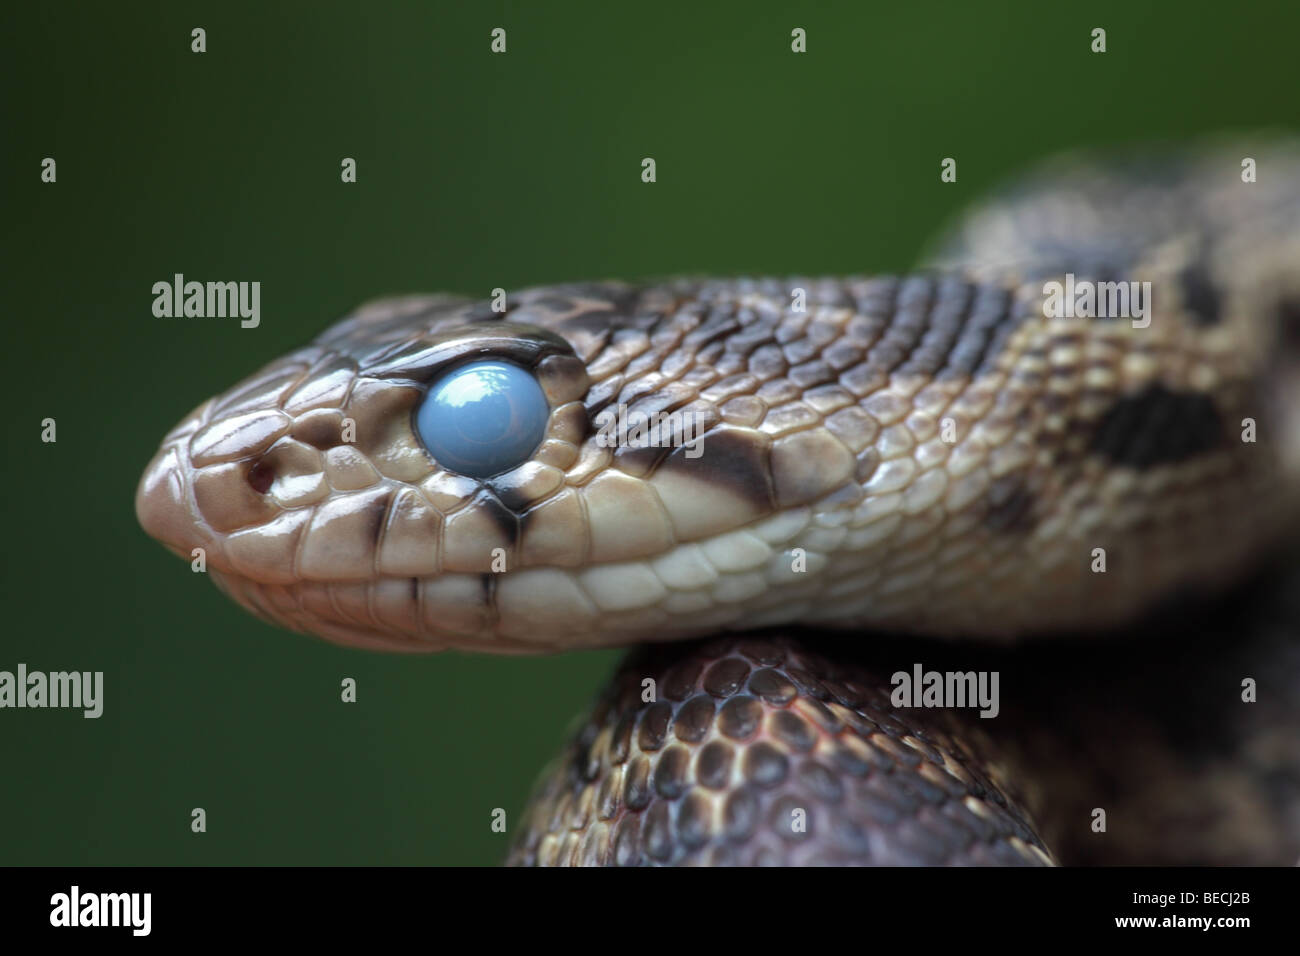 Snake Sheds Skin High Resolution Stock Photography and Images - Alamy